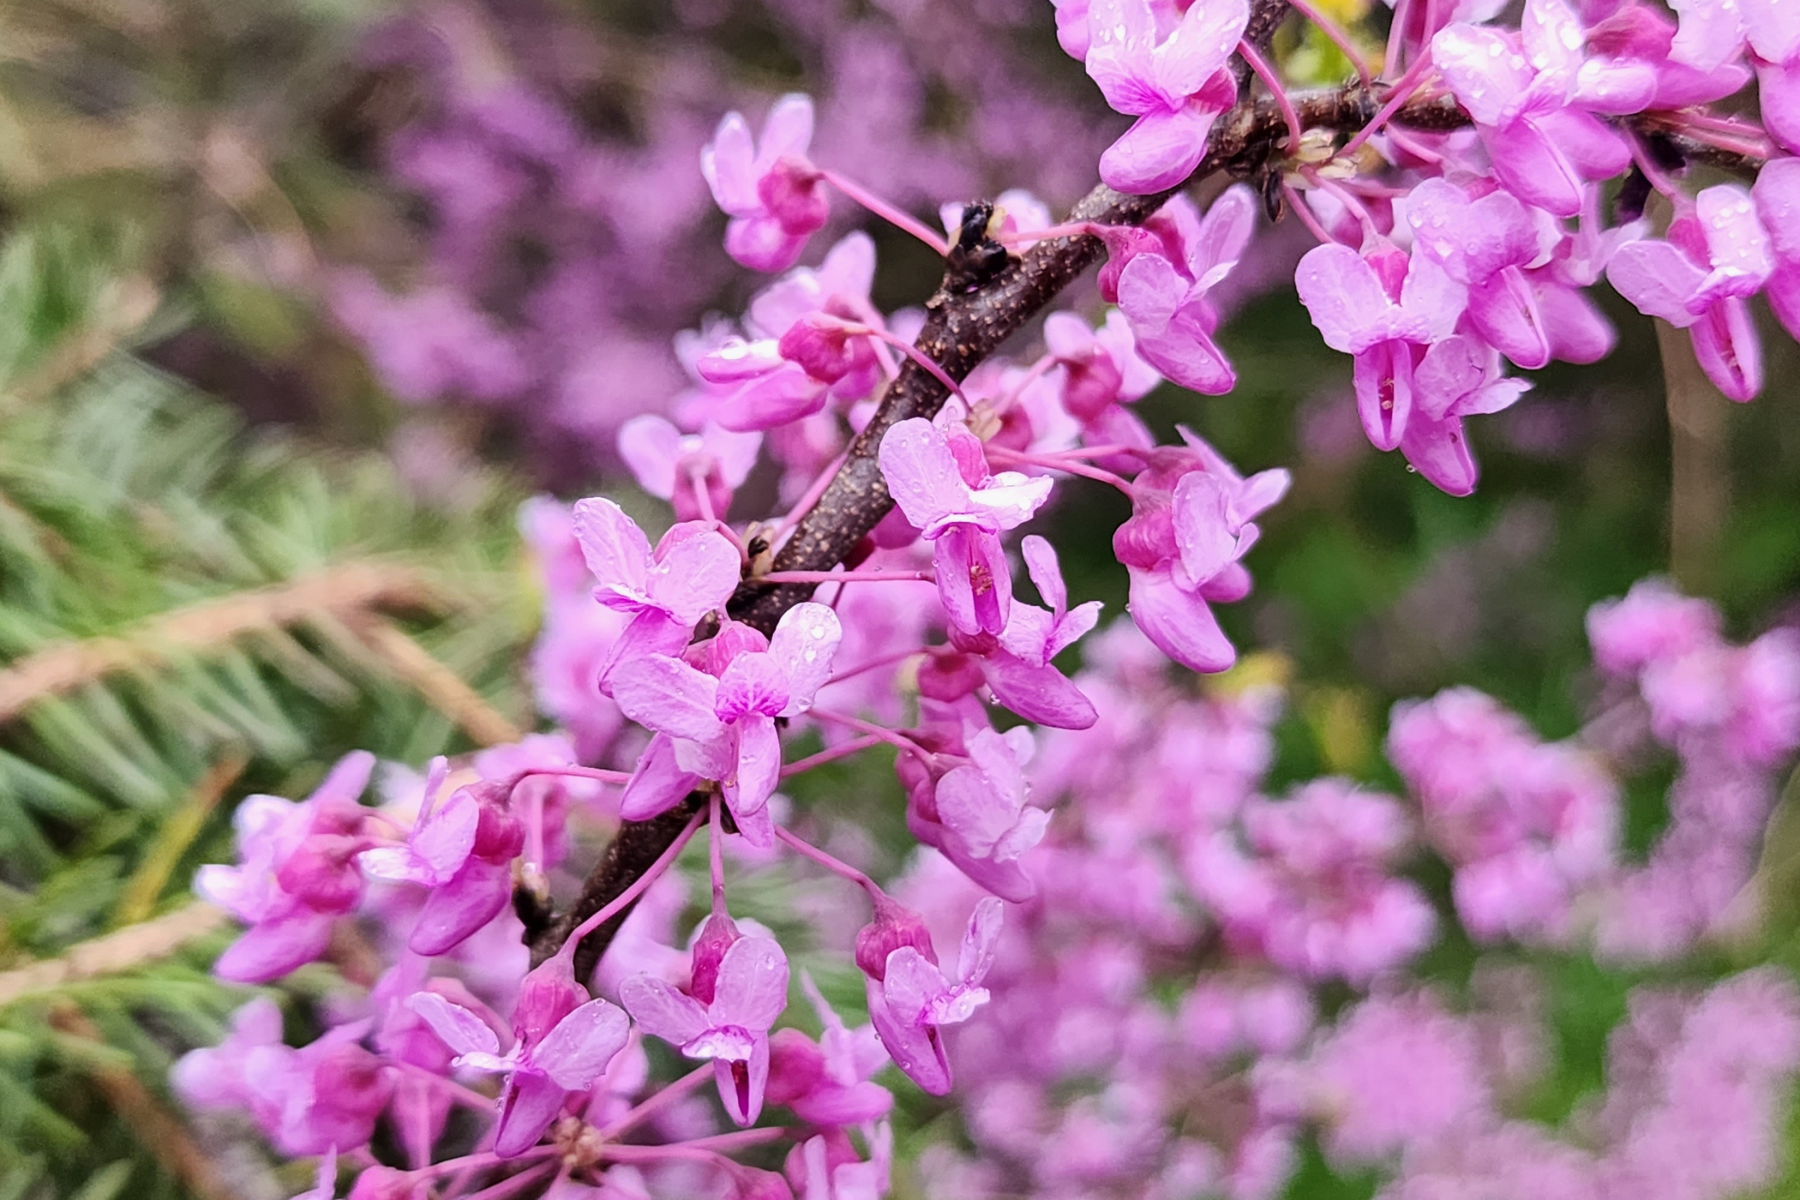 A close up shot of beautiful pink flowers blooming out of a brown vine.